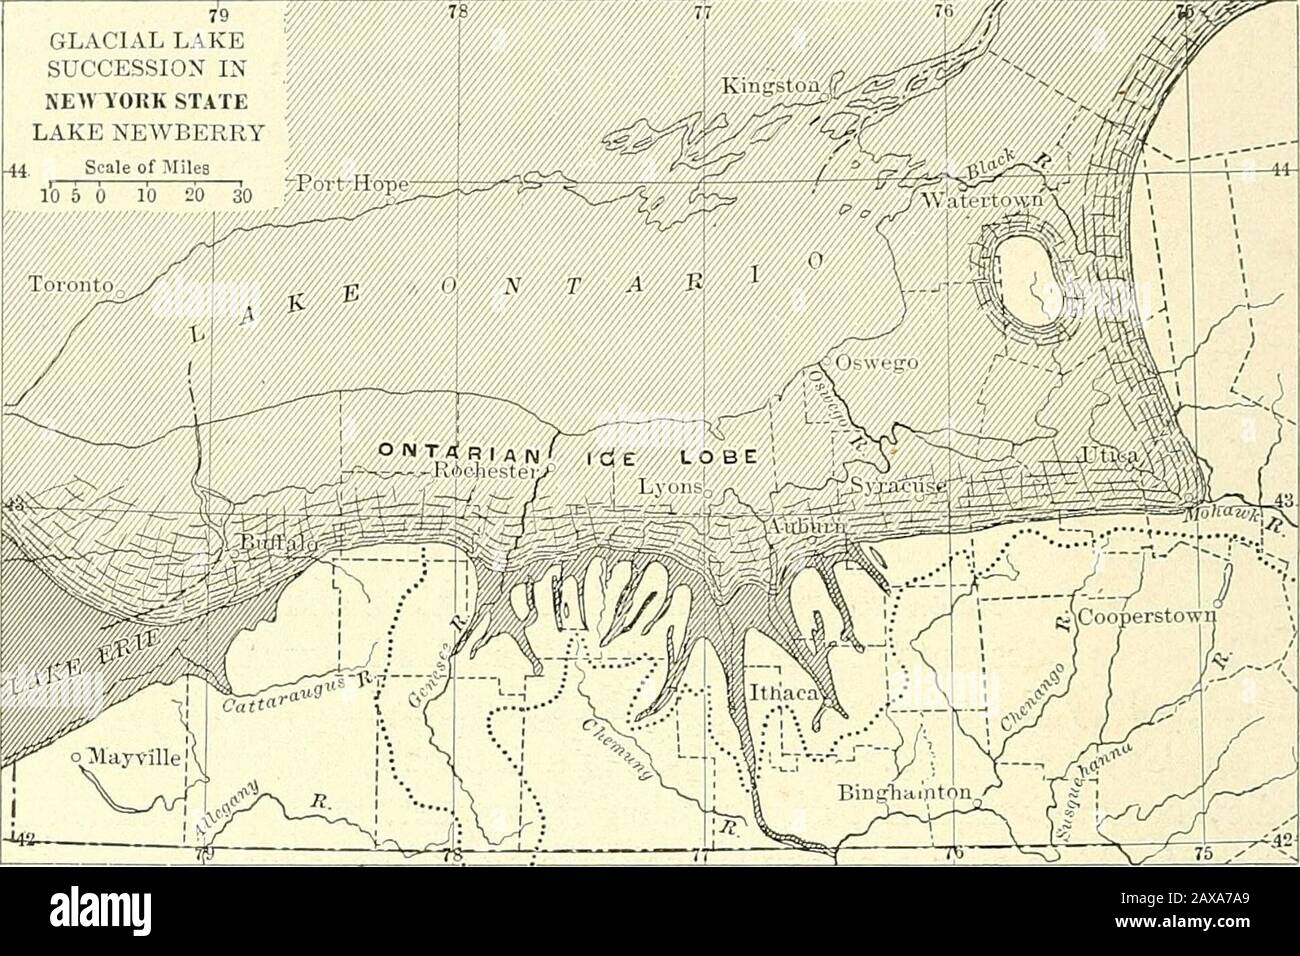 Forest physiography; physiography of the United States and principles of soils in relation to forestry . between the Lake Ontario and the Susquehanna drainage. The earliest accumulations of ice dammed the waters at the heads ofthe great valleys on the south. Upon the gradual retreat of the icelower outlets were offered past the ice margin and across the ridges orplateau spurs between the lakes, so that high valley lakes drained intolower valley lakes; as the ice front receded still farther the lakes weresuccessively lowered and shifted northward and rivers formed in theinter-valley or spur tra Stock Photo